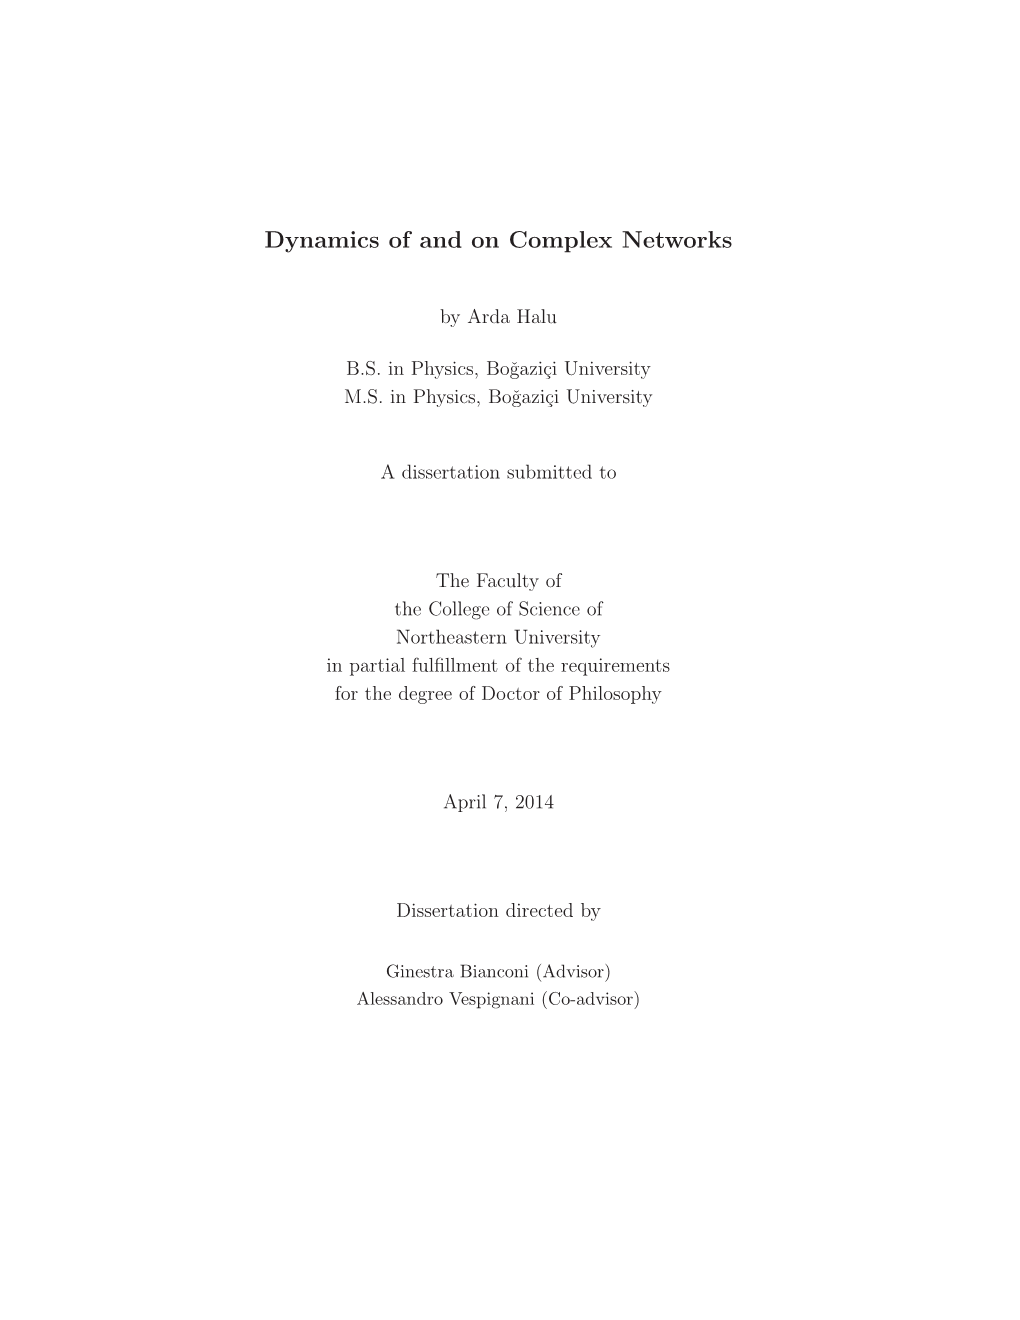 Dynamics of and on Complex Networks